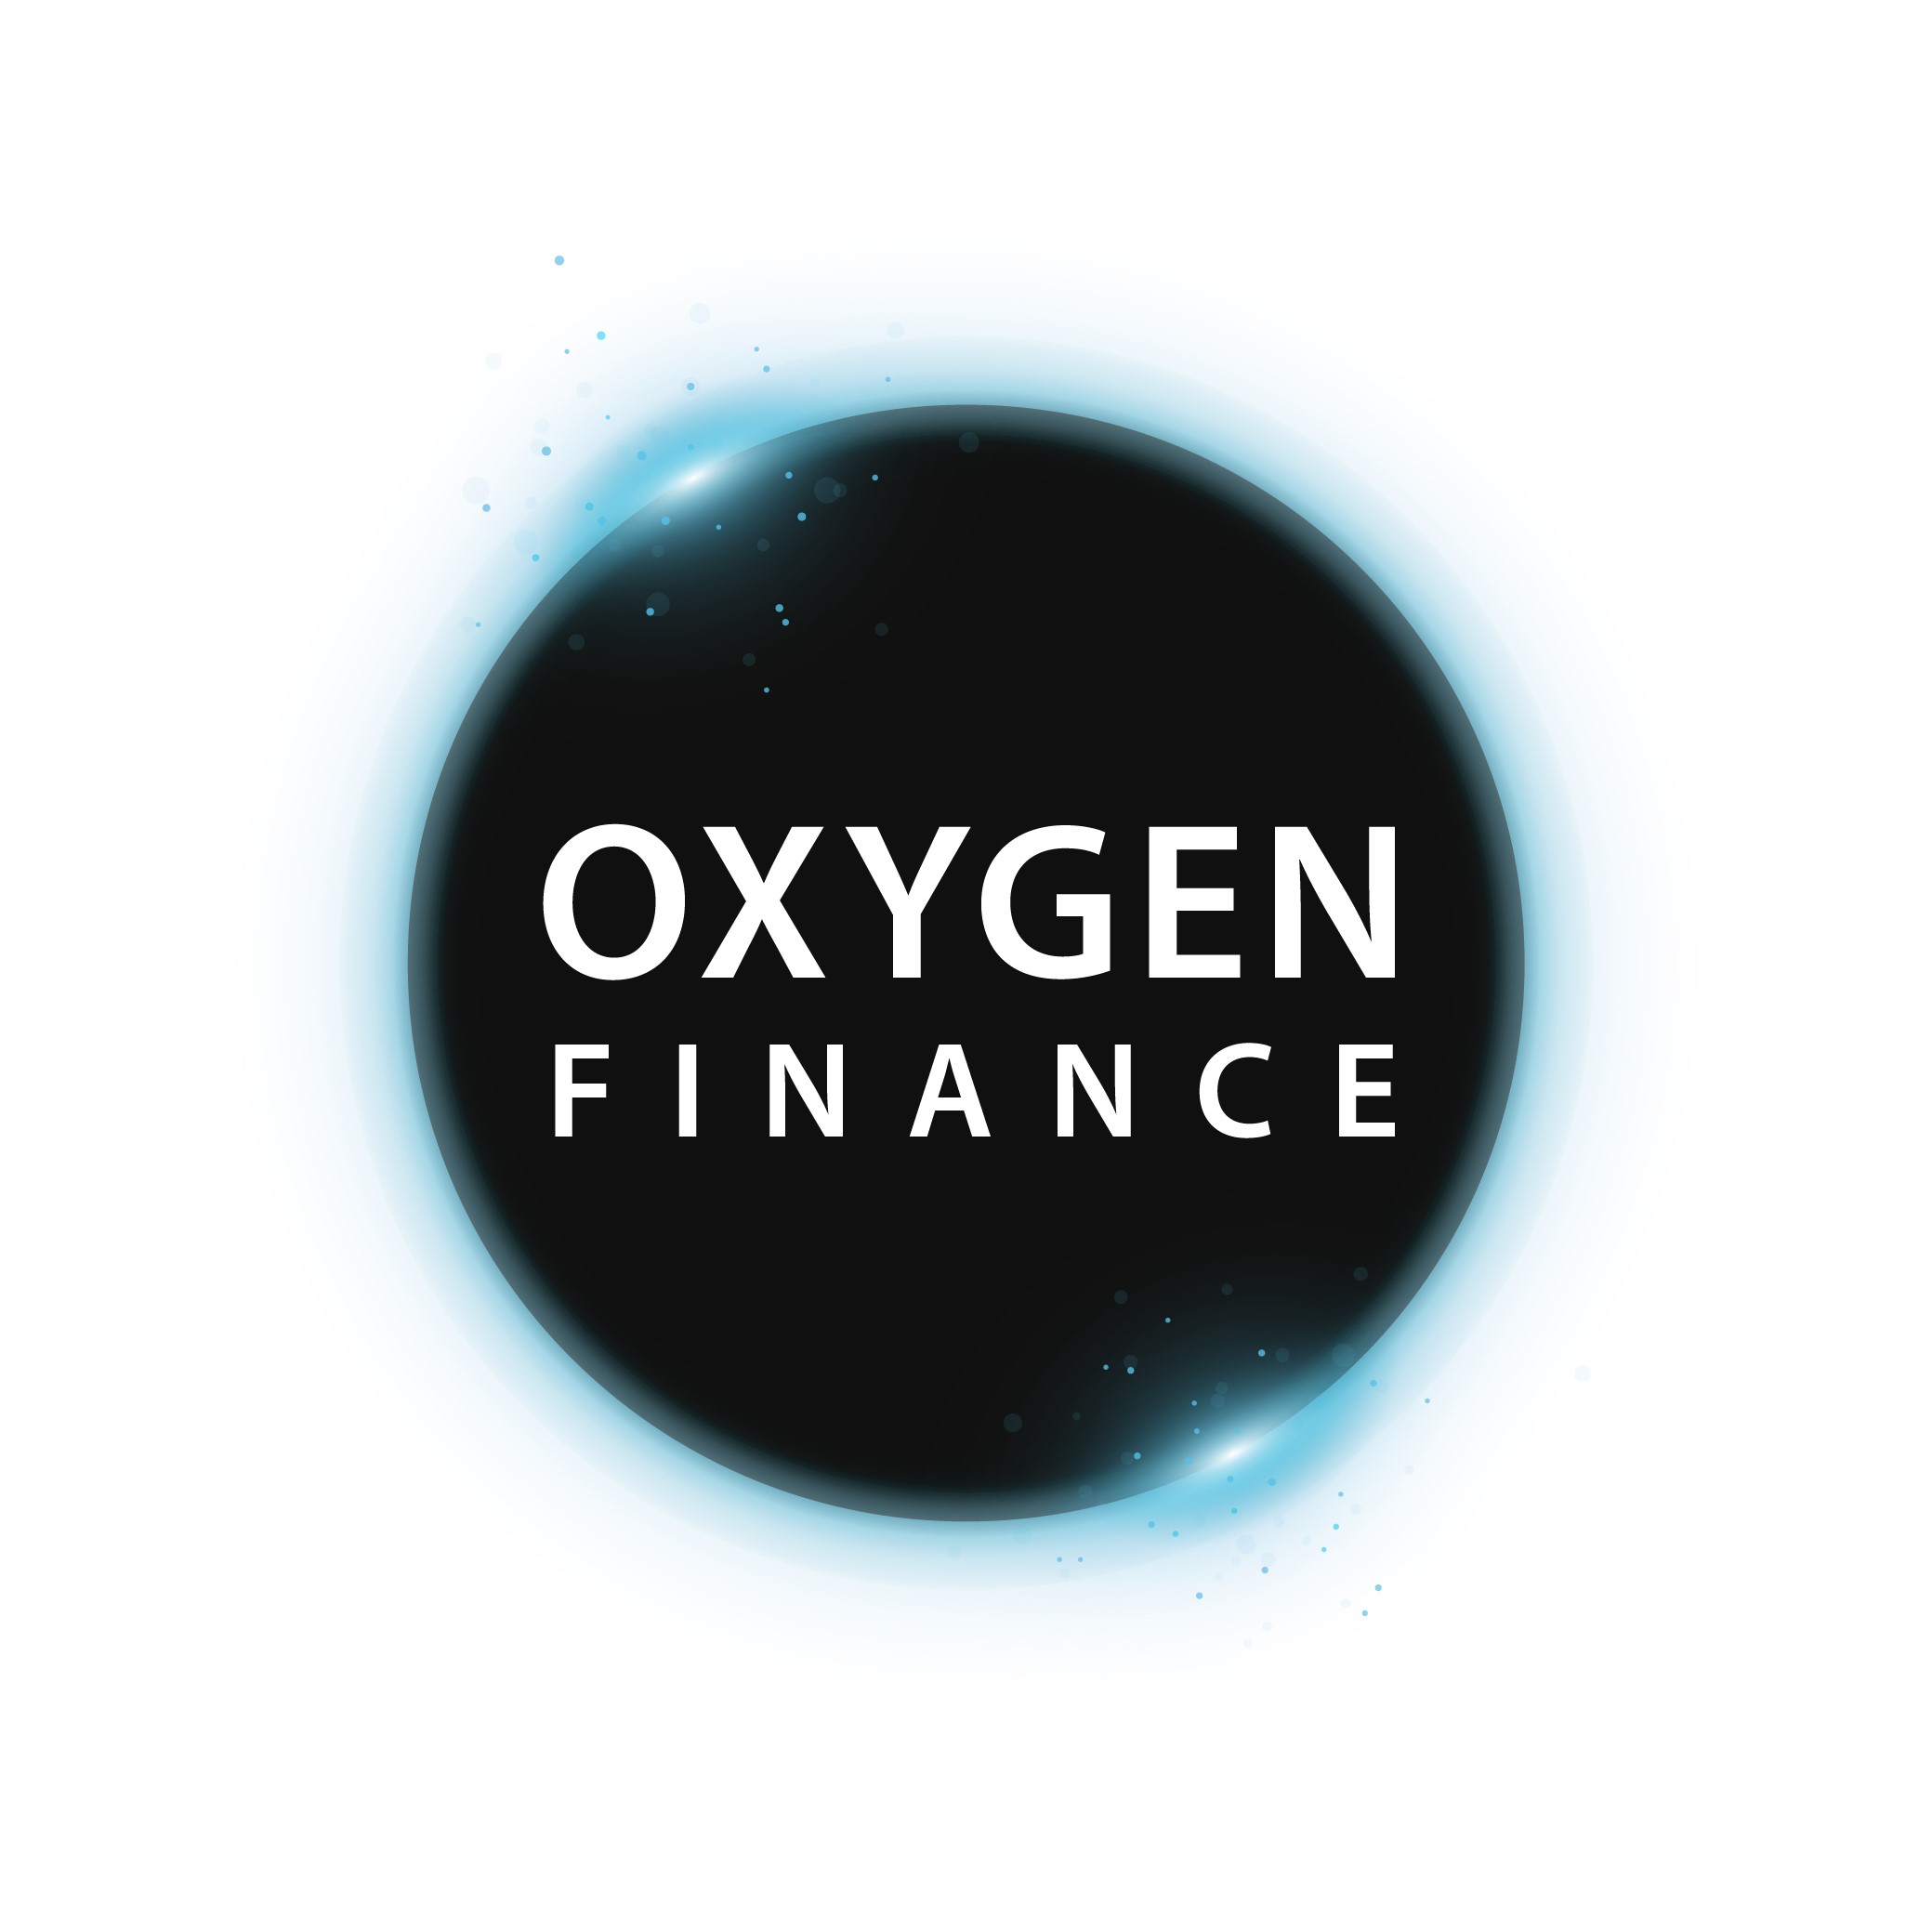 Oxygen acquires bidstats.uk, the UK’s No 1 portal for public sector tender information, extending its market leading position